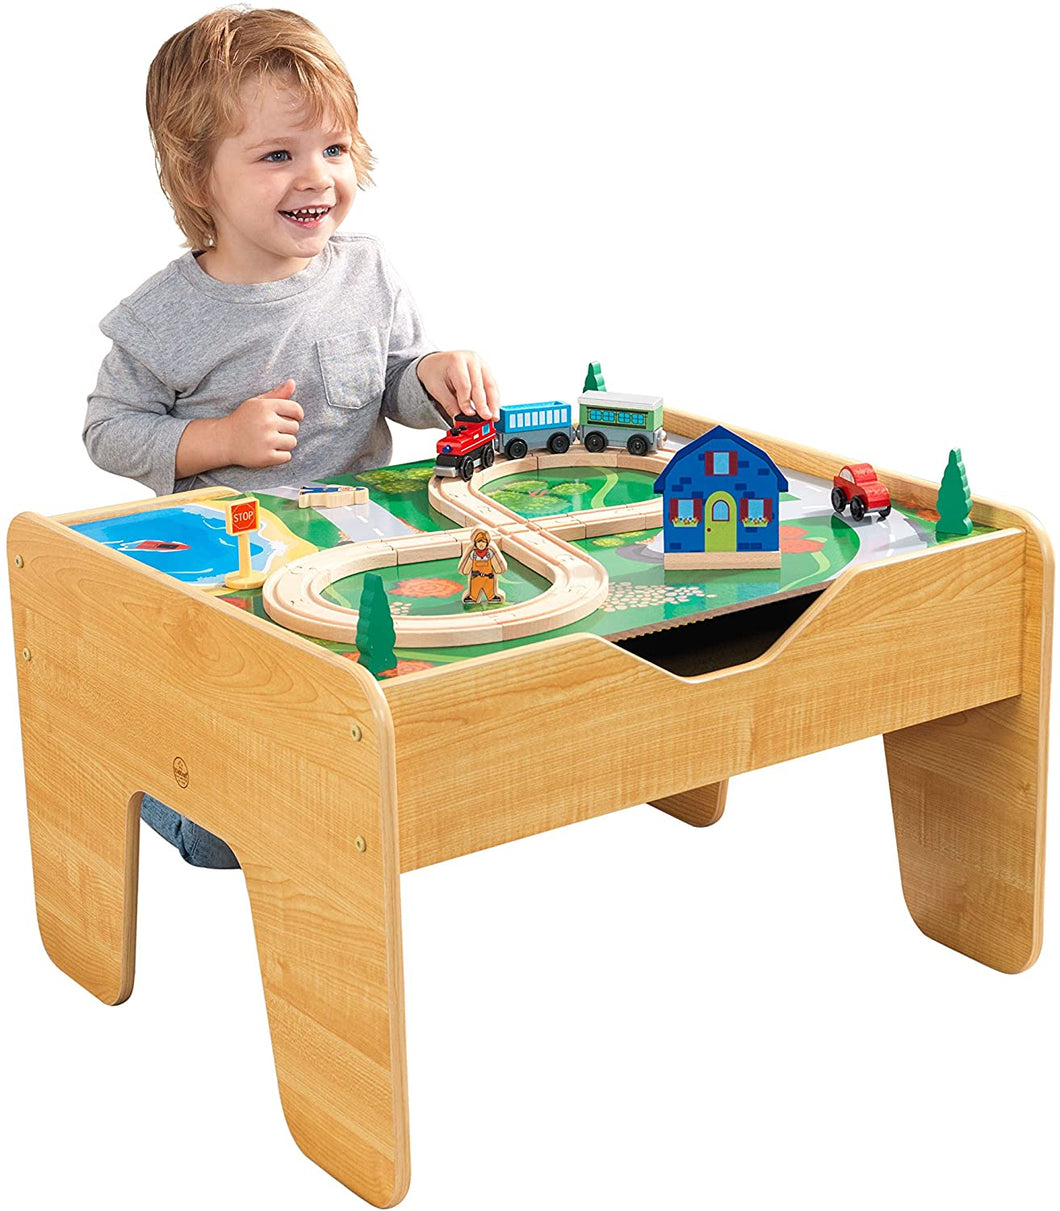 KidKraft 2-in-1 Reversible Top Activity Table with 200 Building Bricks & 30Piece Wooden Train Set - Natural, 28.5